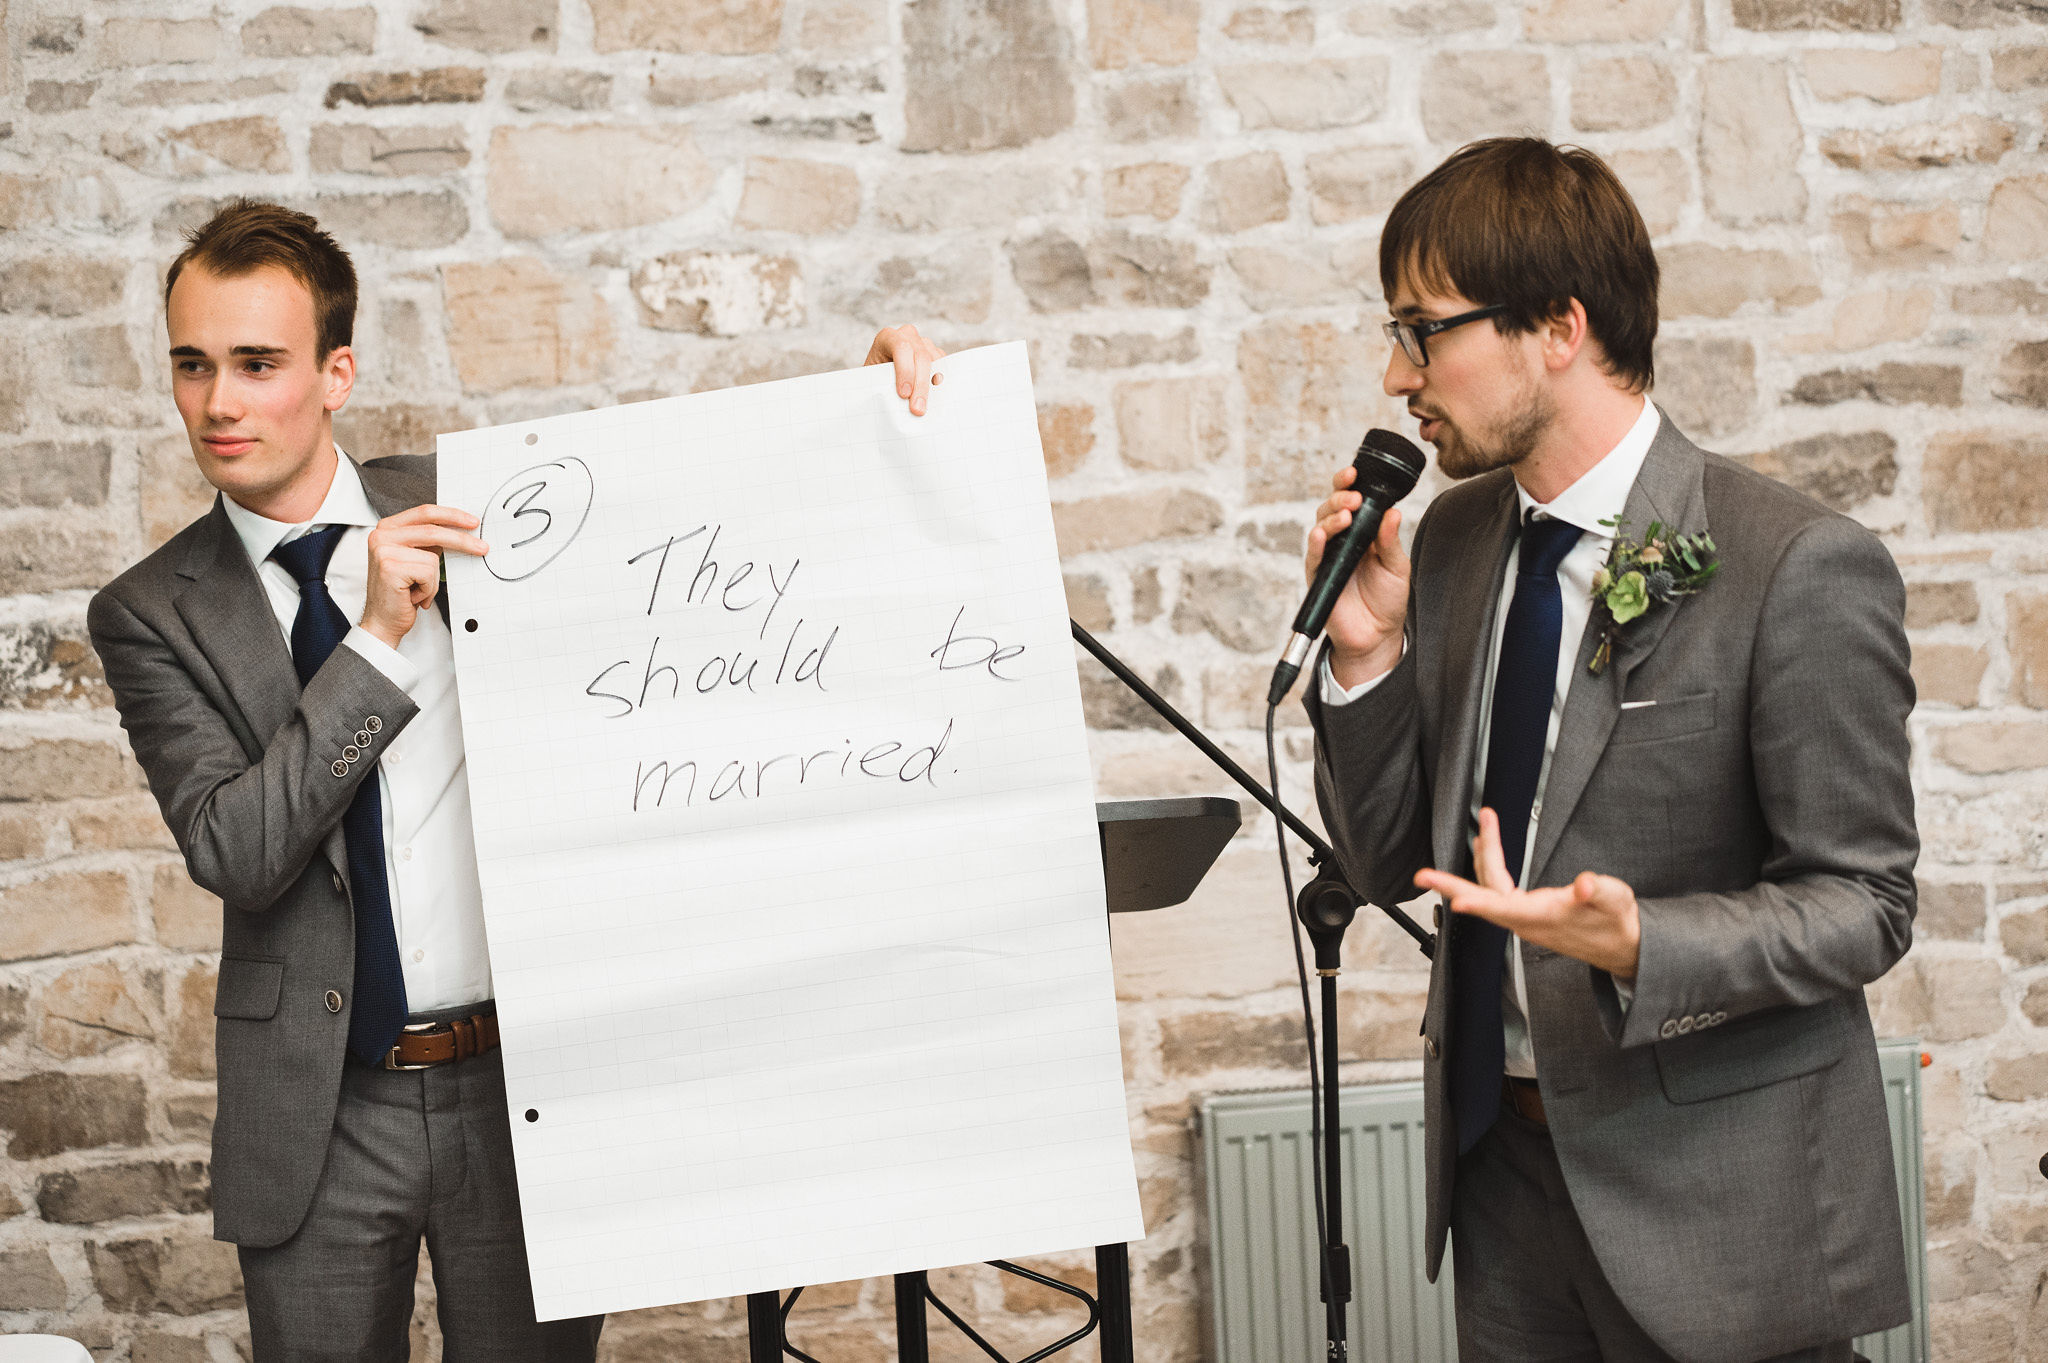 A couple groomsmen holding up a large sheet of paper with "They should be married" written on it as one of them reads into the microphone during a charming southern style wedding at Ruthven National Historic Site